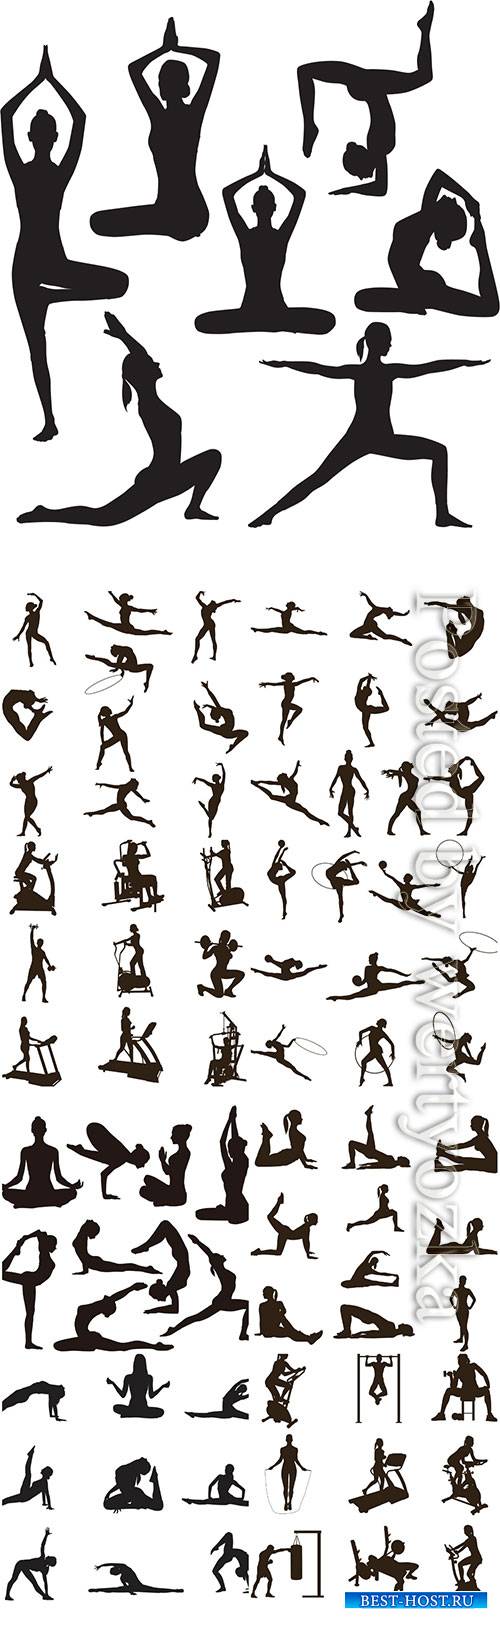 Silhouettes of women go in for sports, fitness, yoga